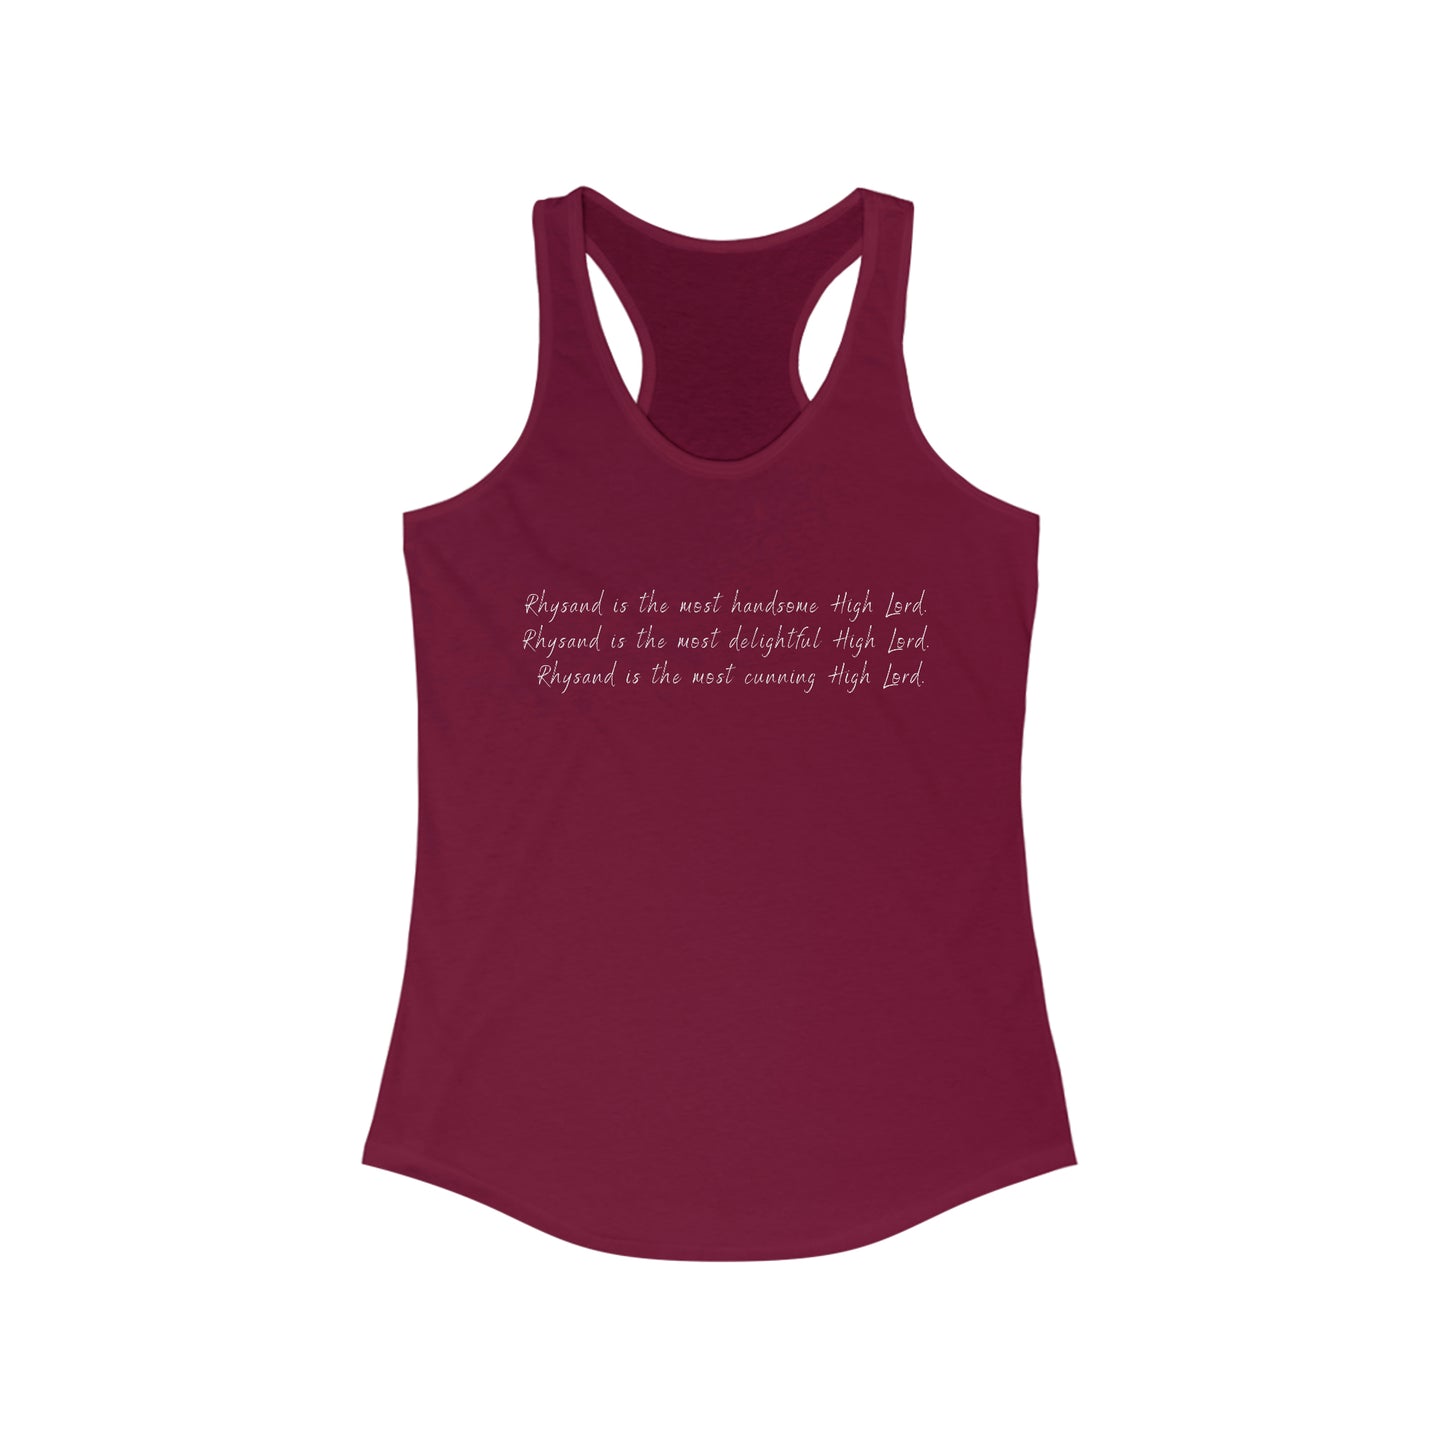 Rhysand is the... Racerback Tank